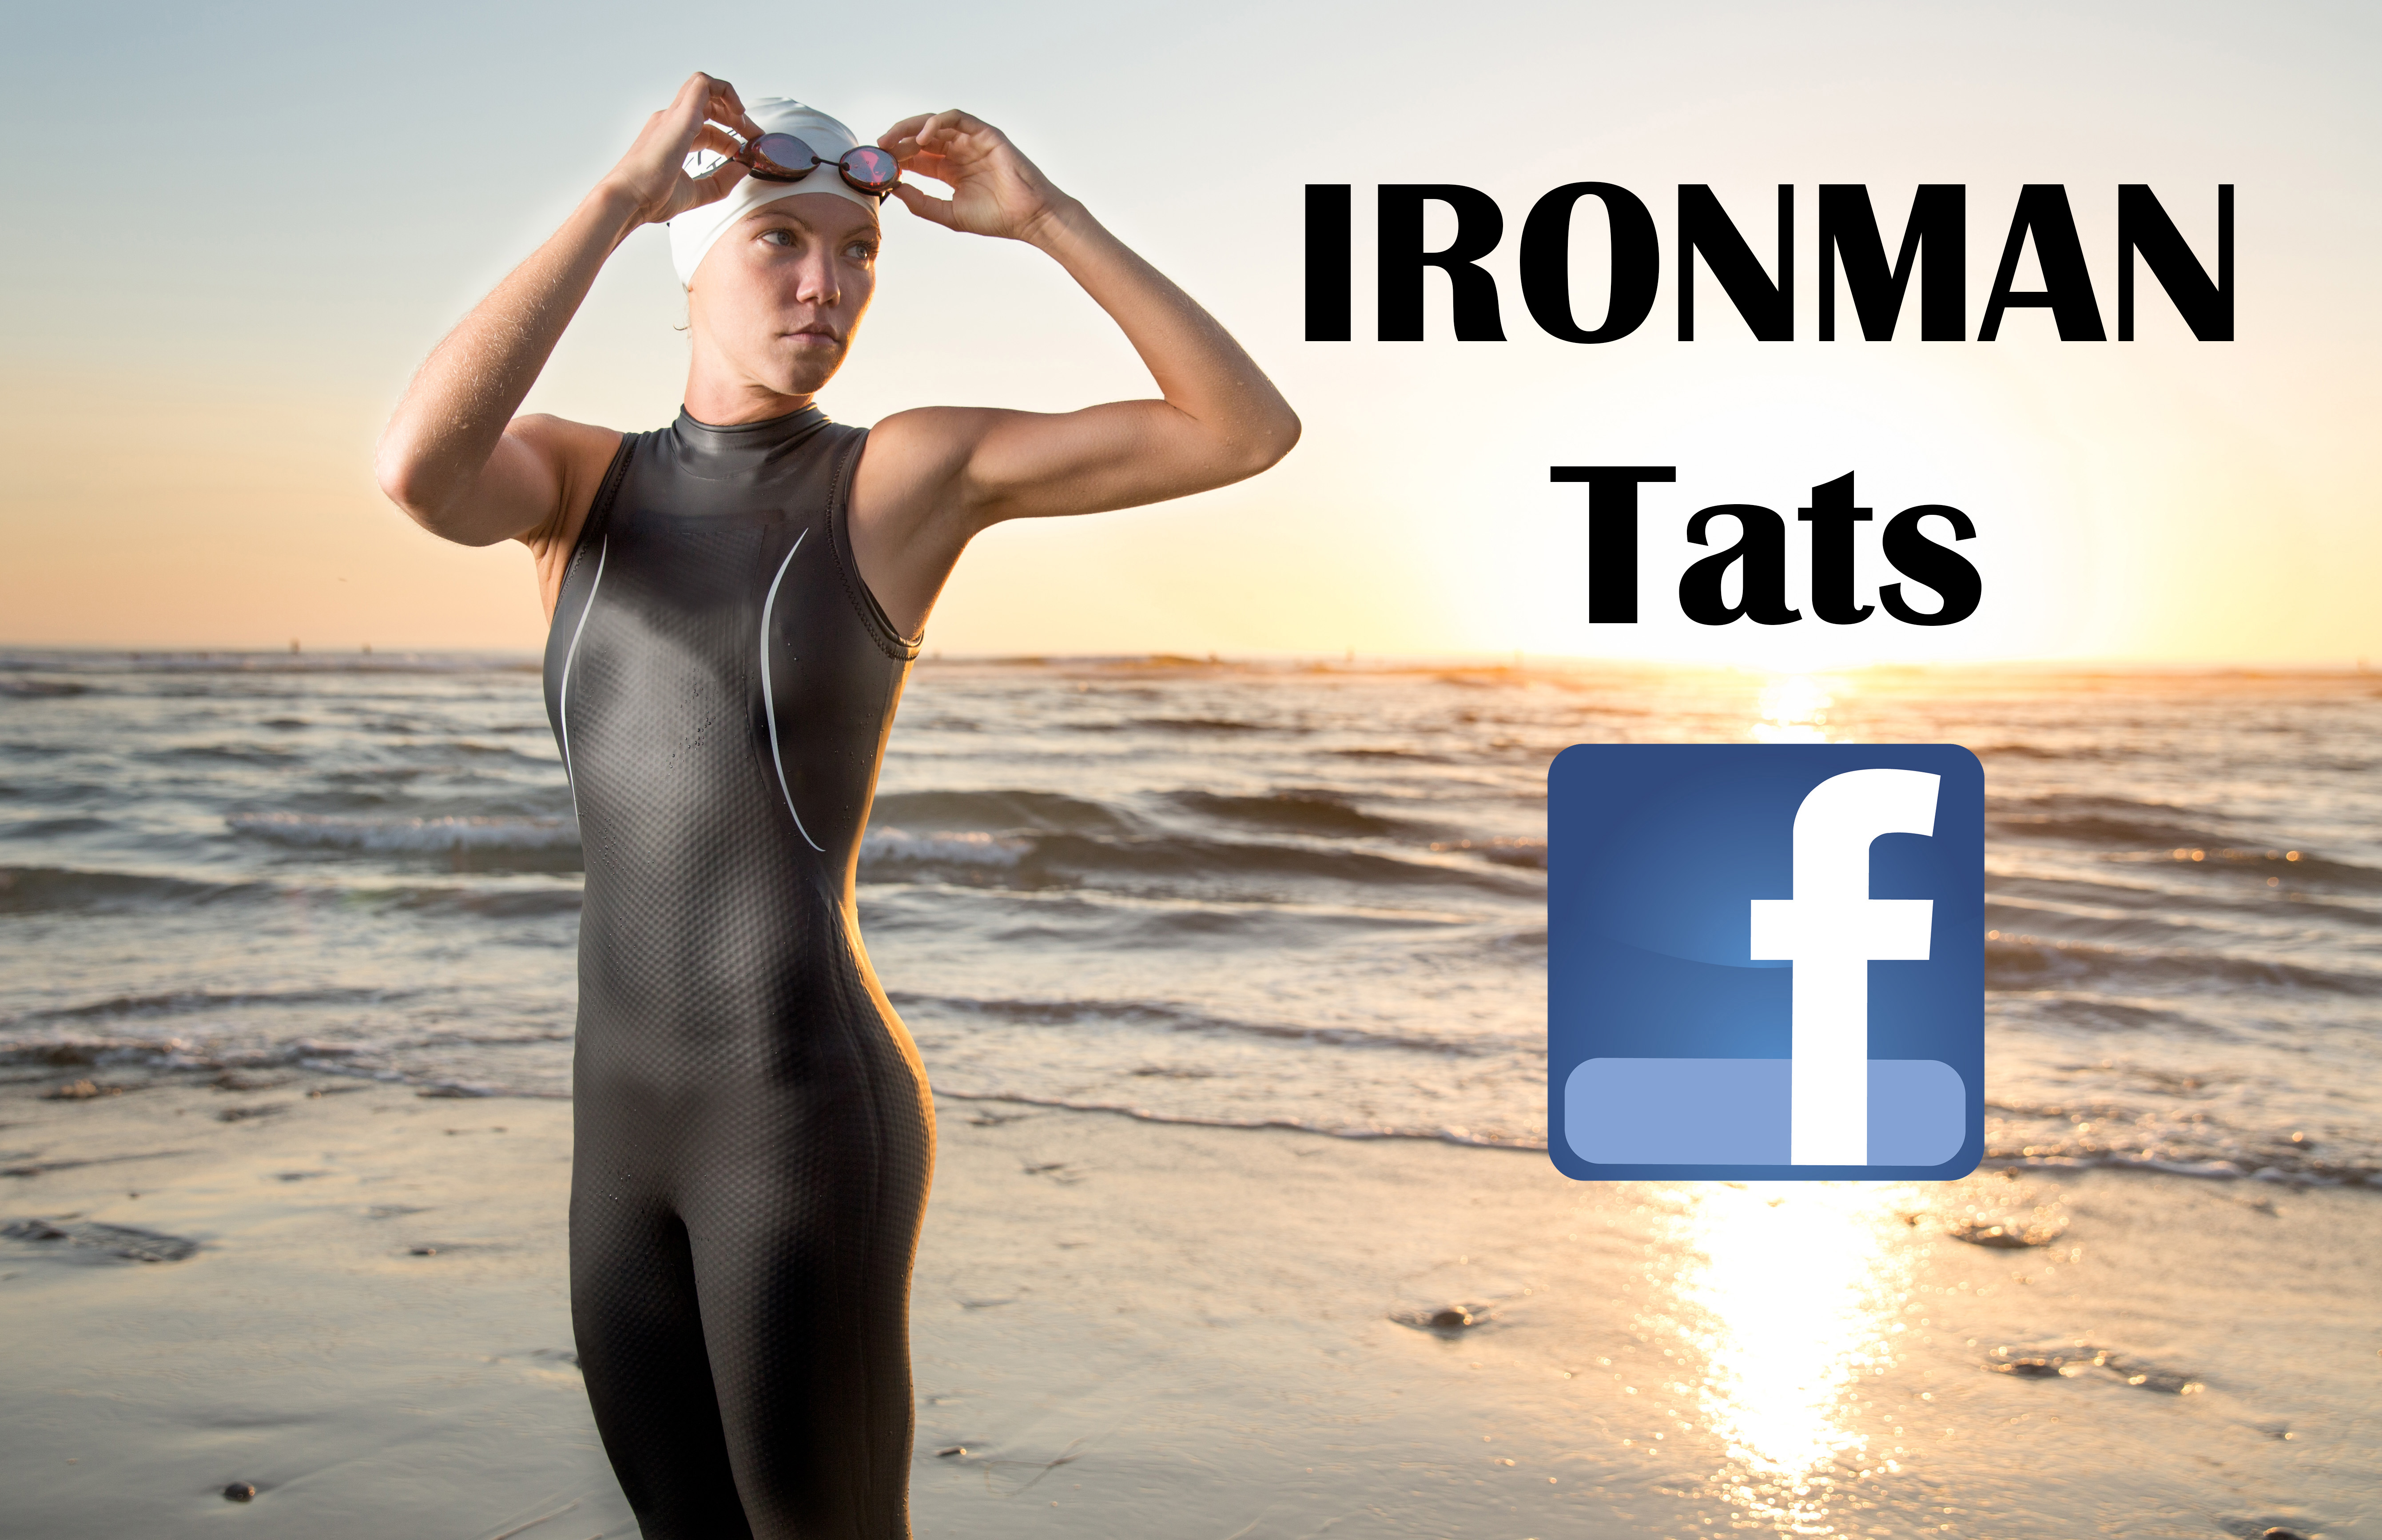 7 IRONMAN Facebook Groups You Should Join